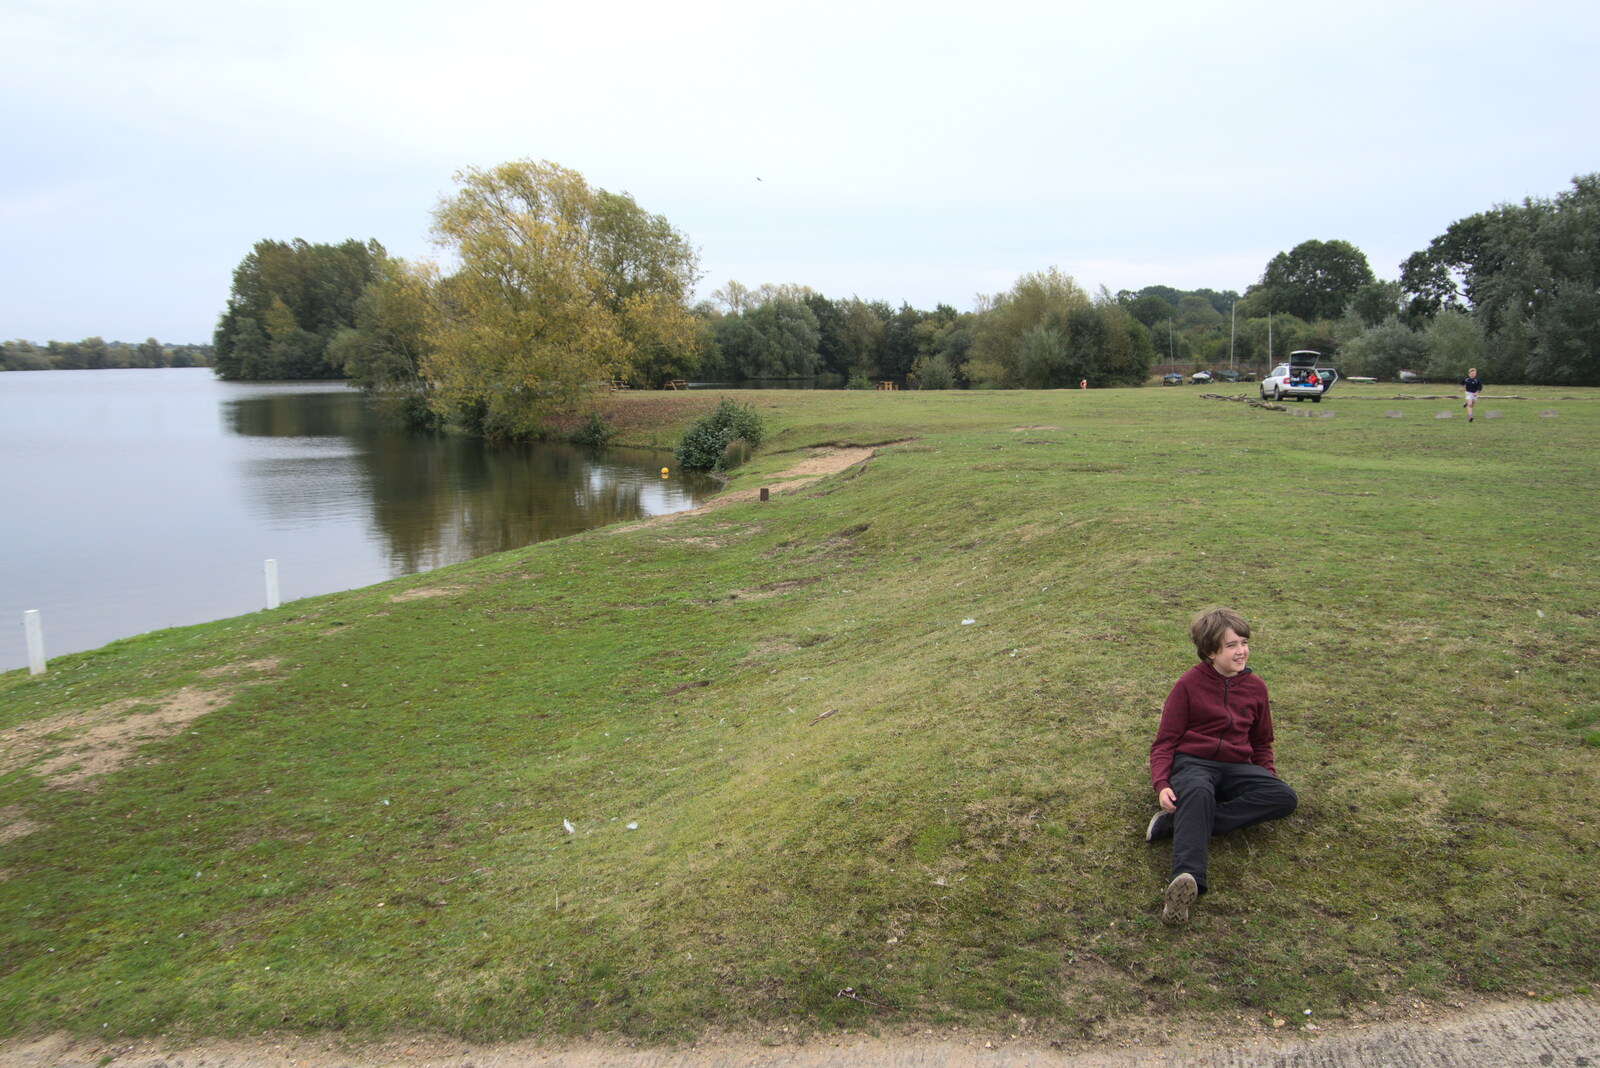 Fred sits on the bank of the lake from A Trip to Weybread Sailing Club, Harleston, Norfolk - 17th October 2021